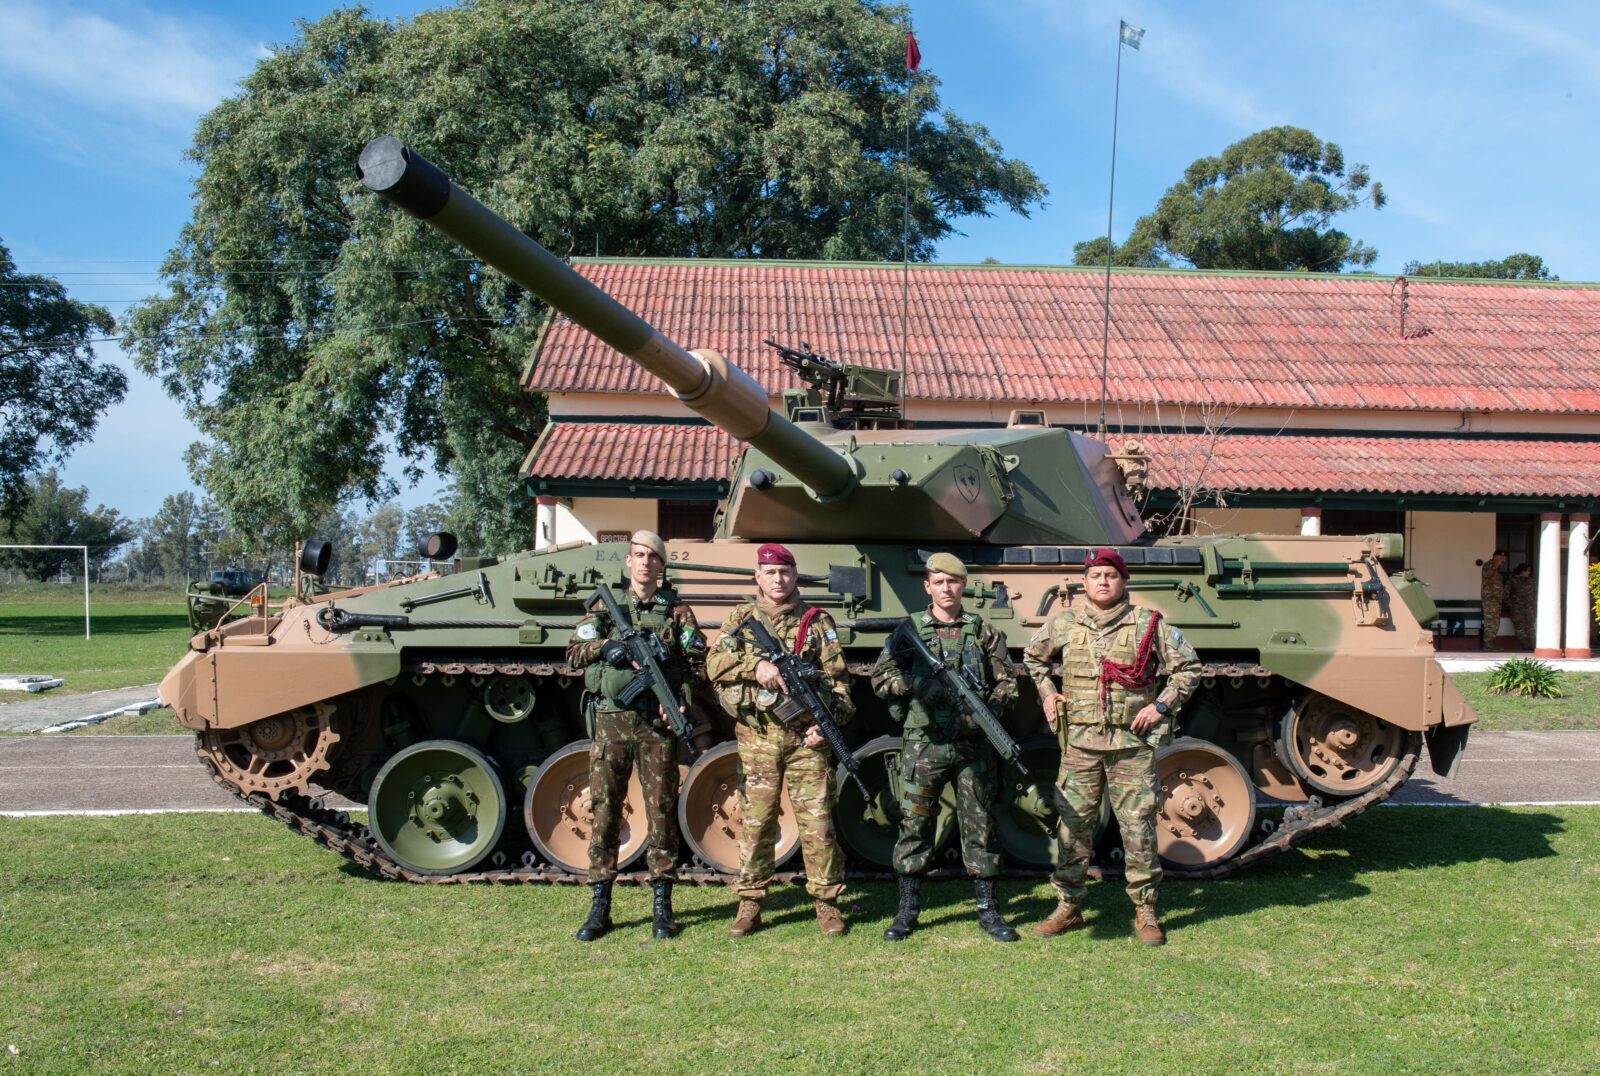 Brazilian and Argentine armies begin exercise in Argentina